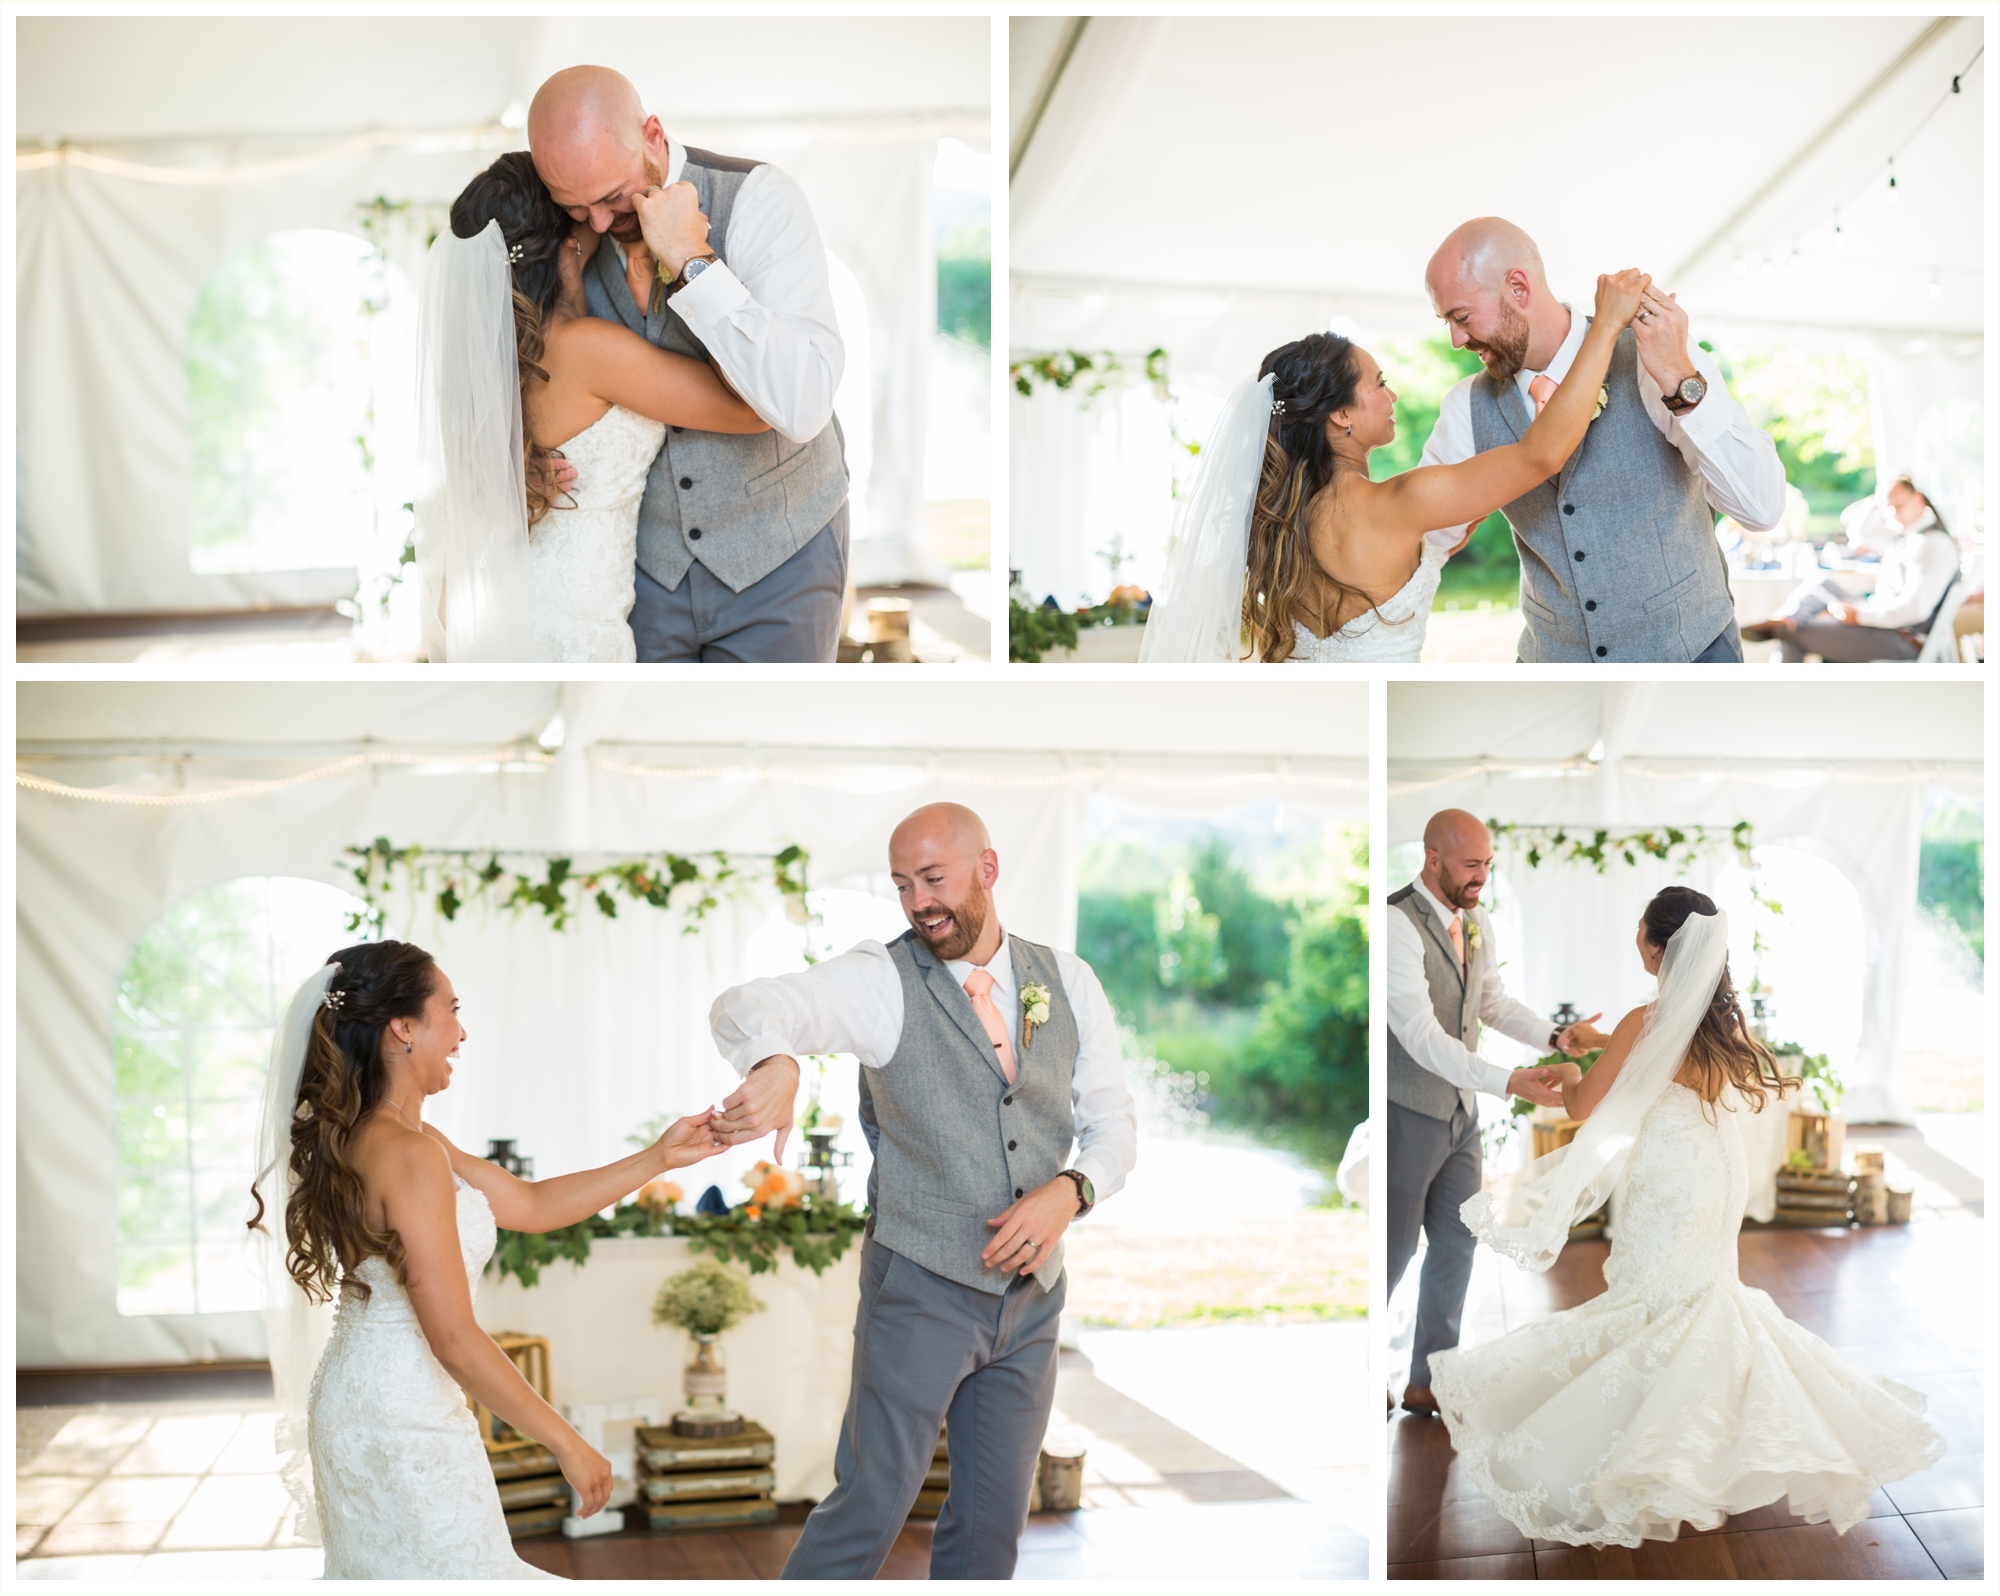 bride and groom share first dance together at wedding reception